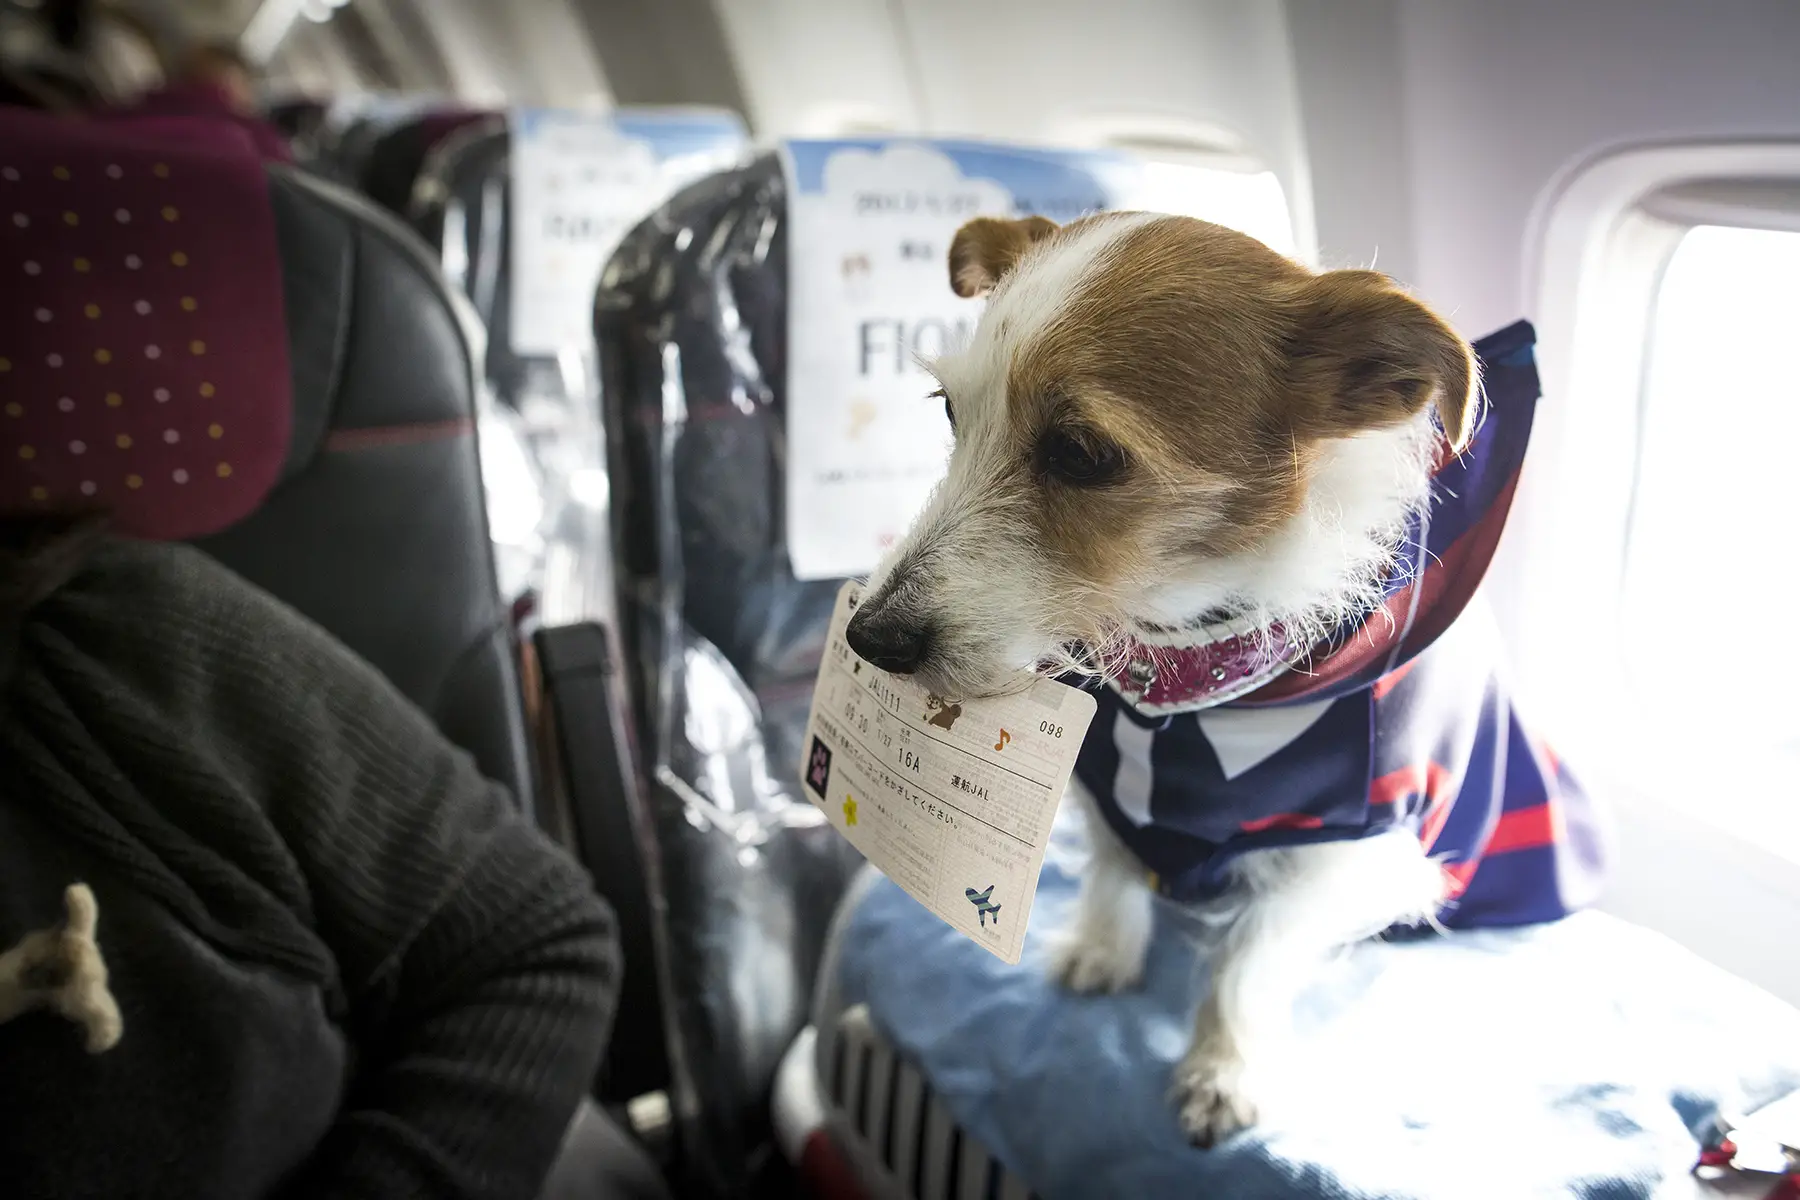 A dog with a ticket in its mouth on plane